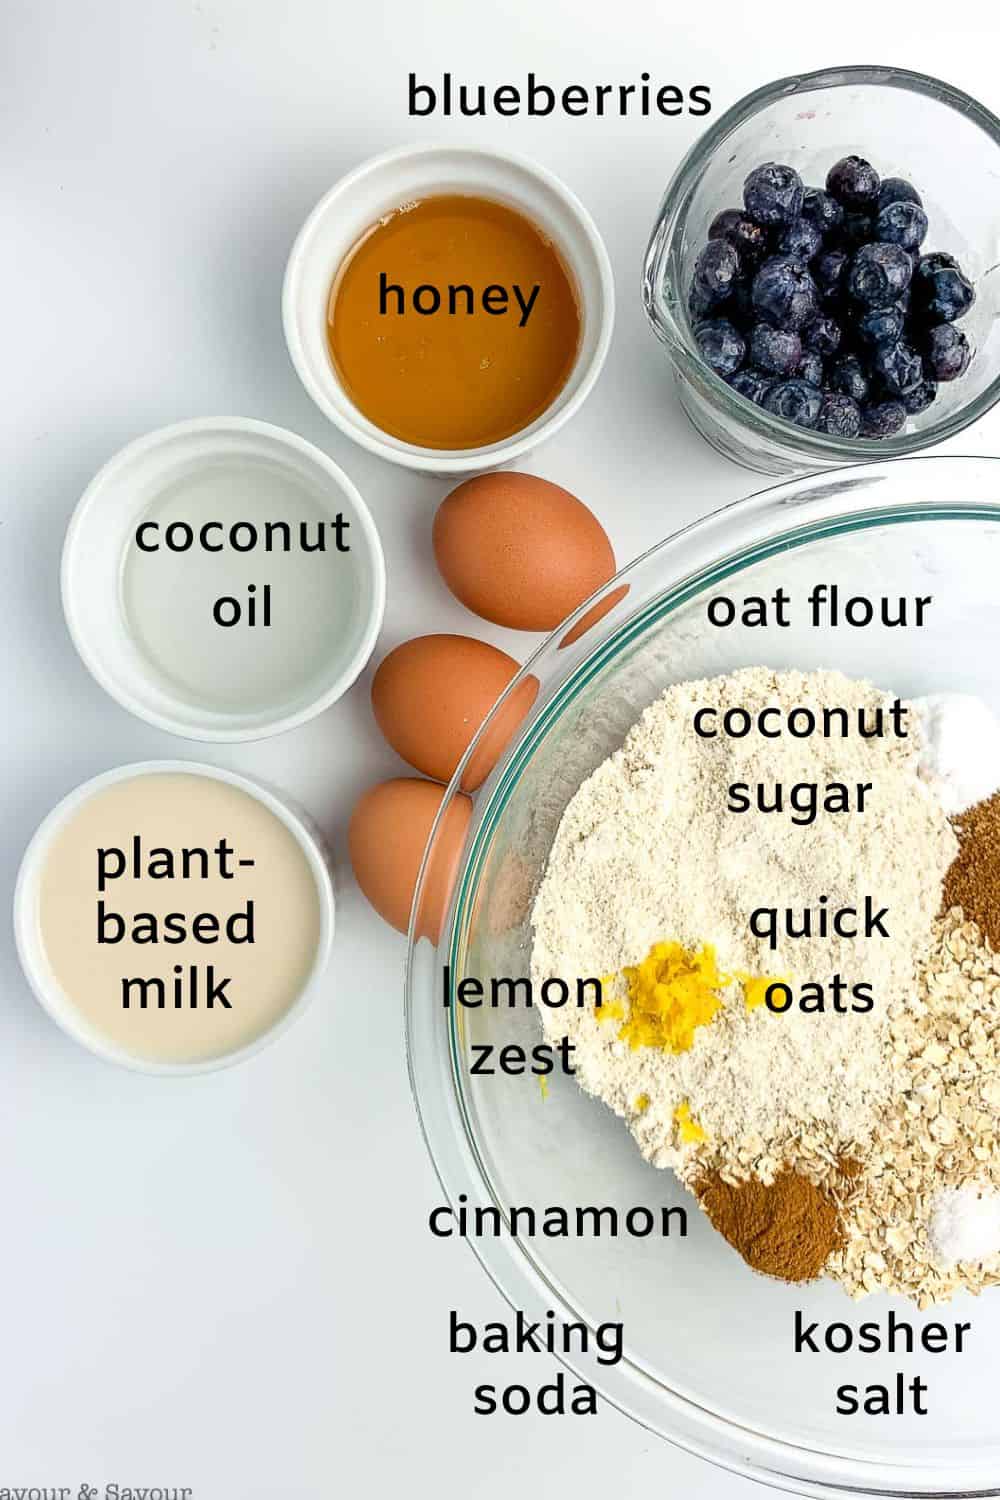 Labelled ingredients for blueberry oatmeal breakfast bars.